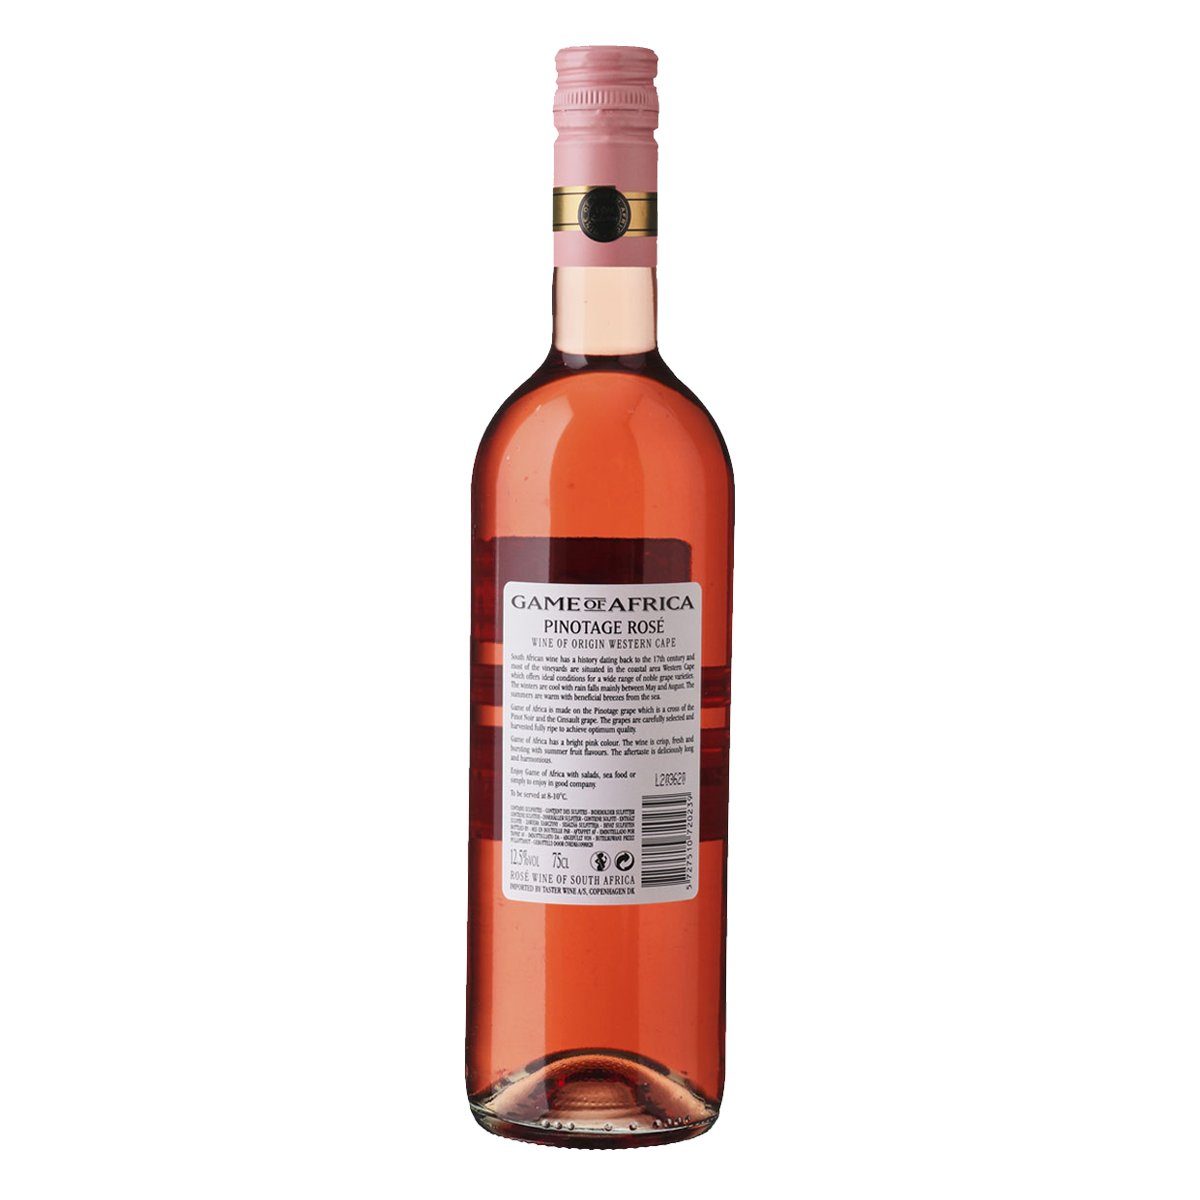 Game of Africa, Pinotage Rose - Bloom Concept